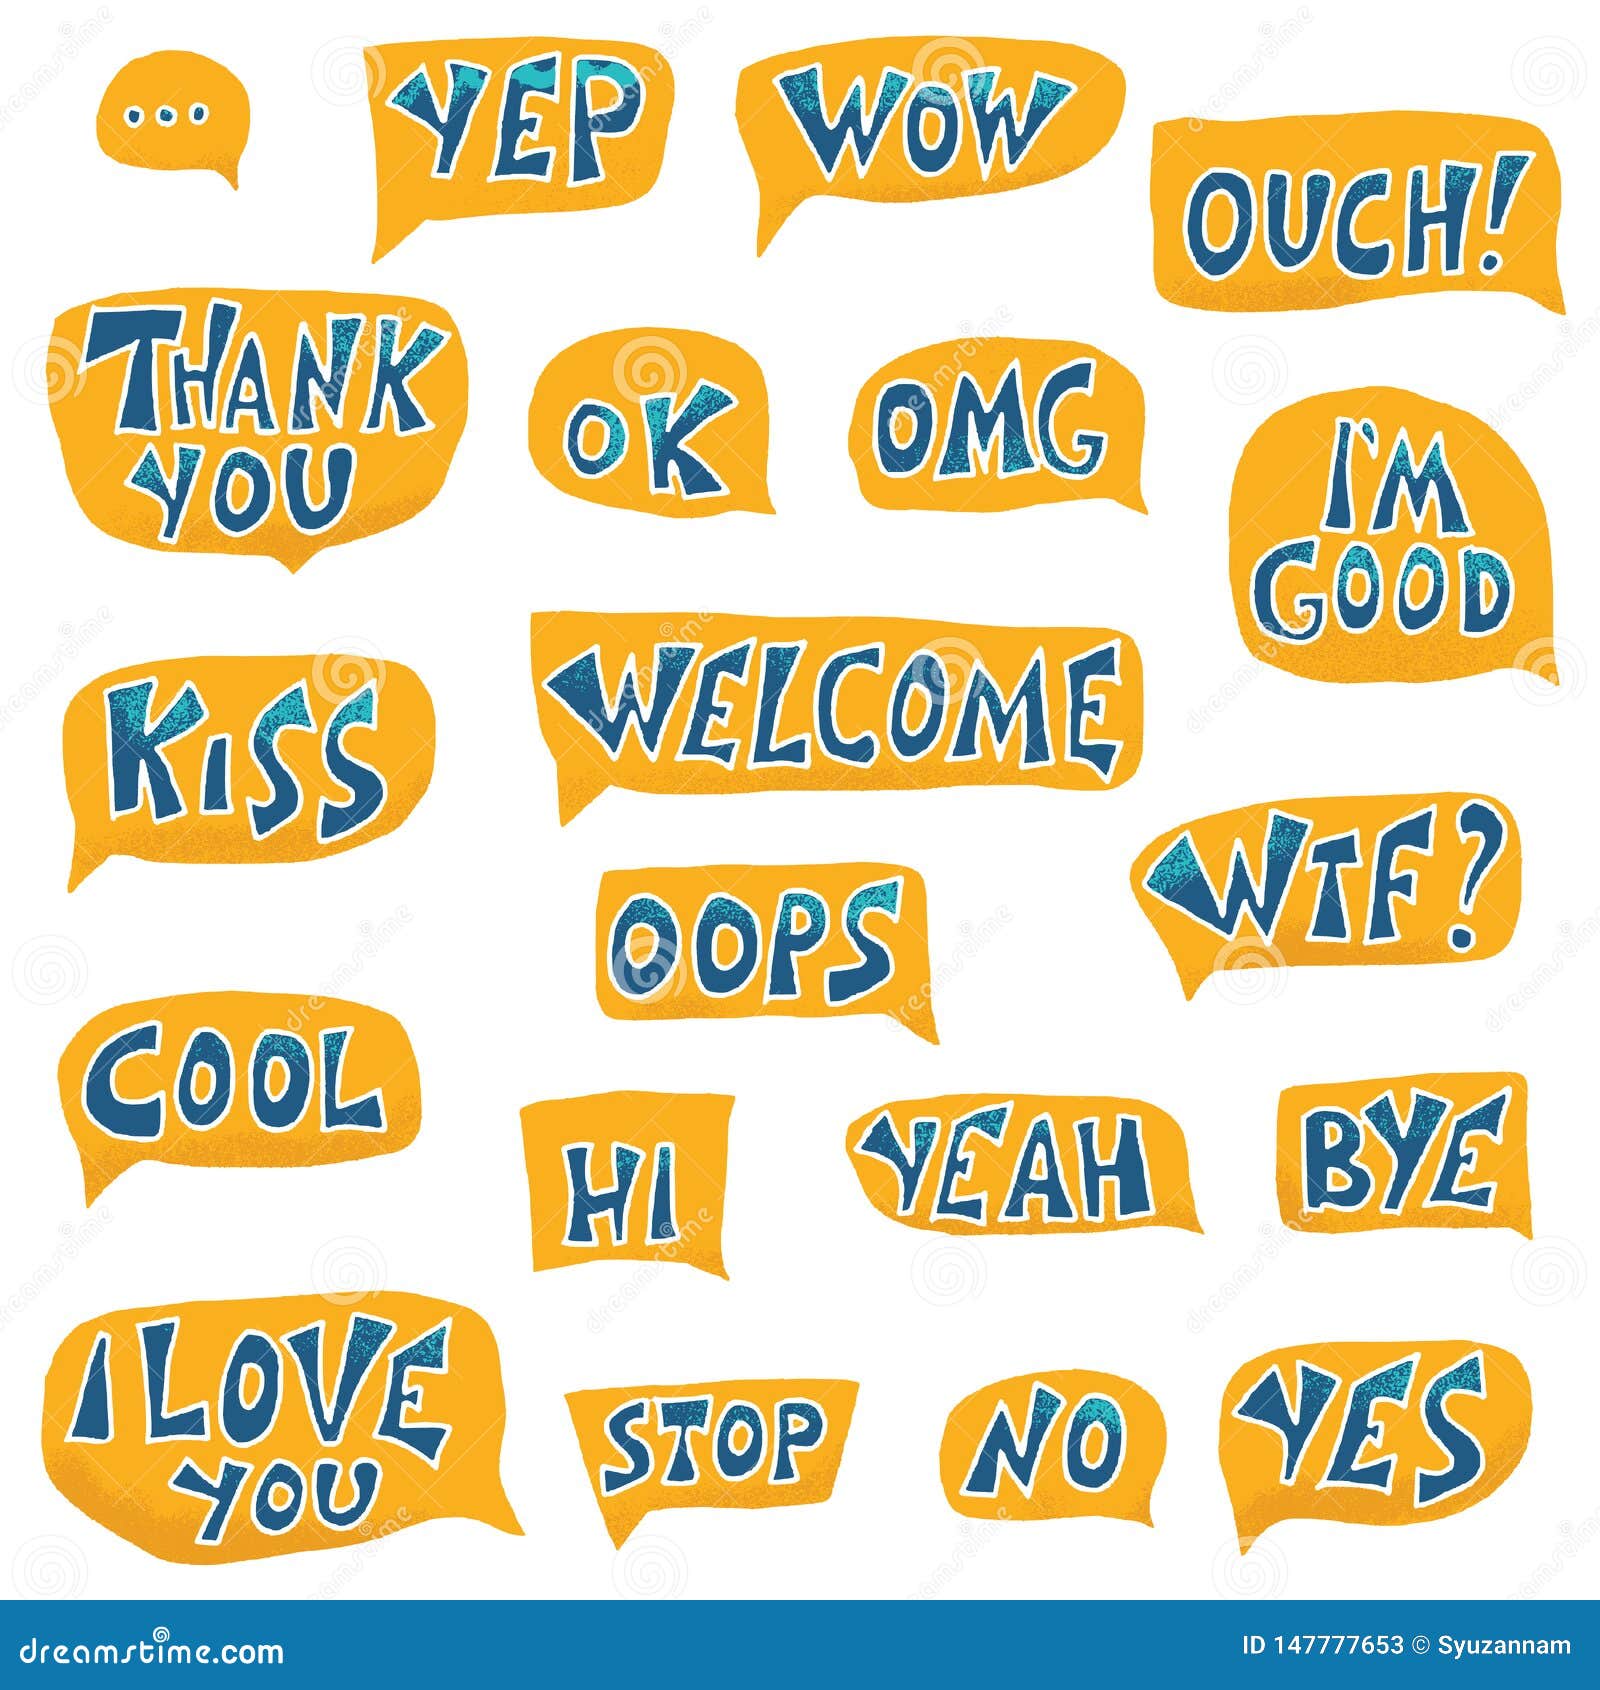 https://thumbs.dreamstime.com/z/set-short-phrases-vector-illustration-lettering-ok-yep-wow-omg-welcome-cool-thank-you-yes-hi-i-m-good-love-bye-no-stop-hand-147777653.jpg